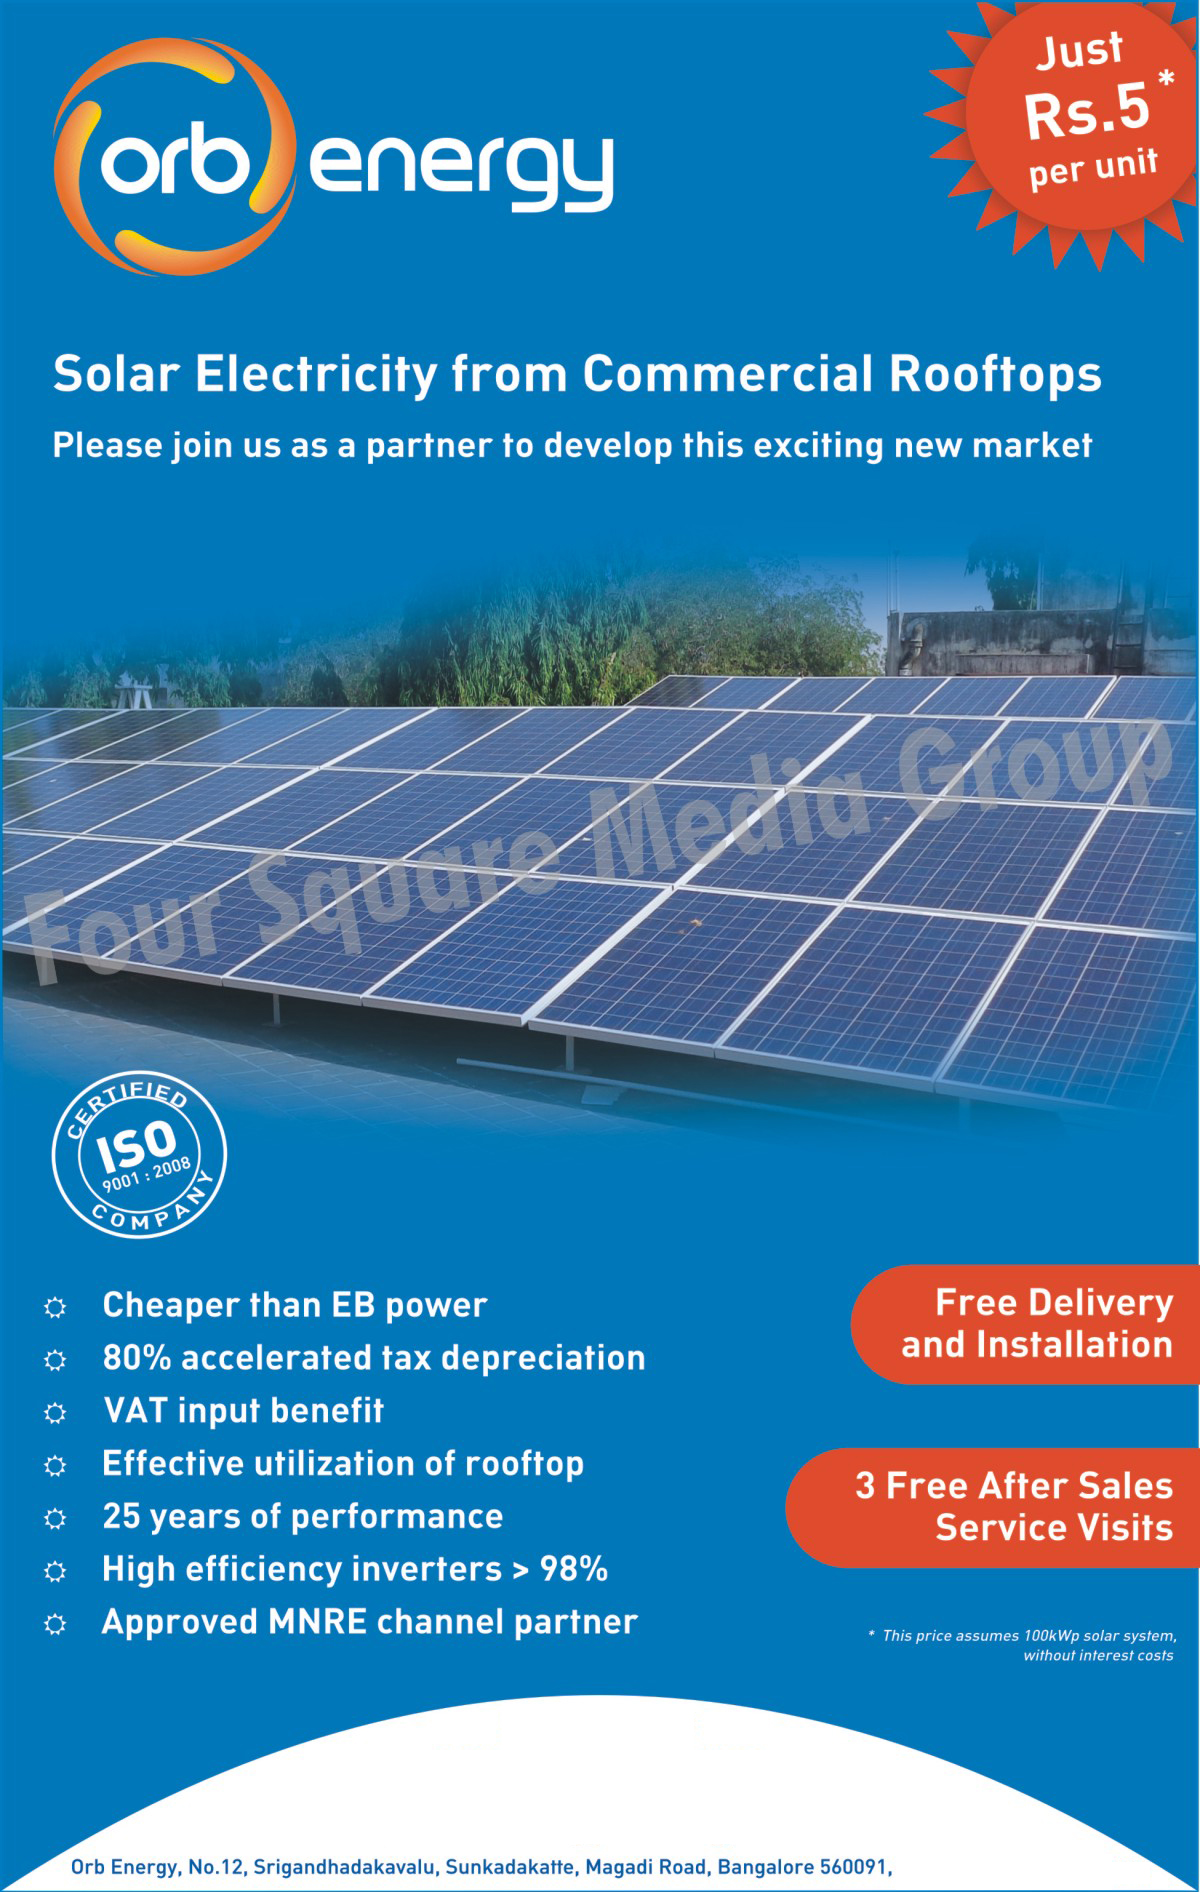 Solar Photovoltaic Systems, Solar PV Systems,Solectric Projects, Sunstream Projects, Solite Projects